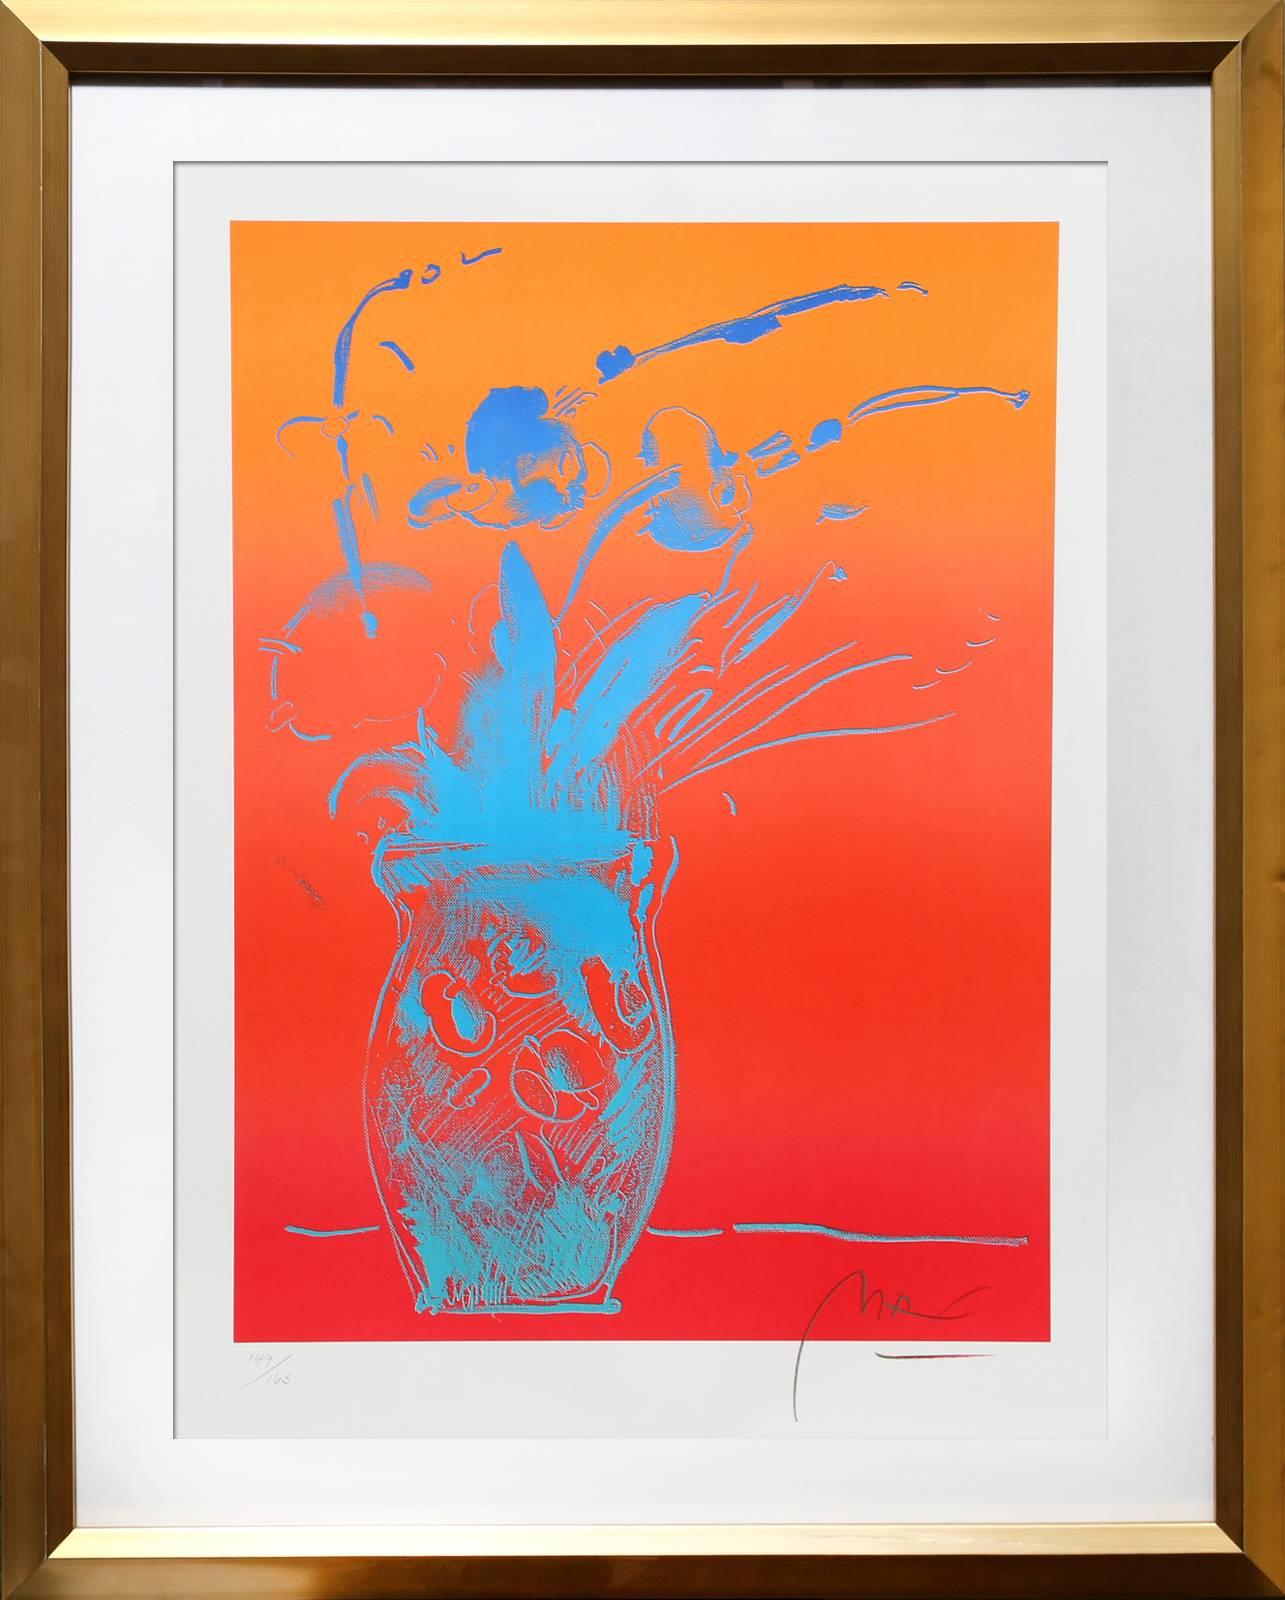 Artist: Peter Max
Title: Blue Vase
Year: 1981
Medium: Lithograph on Somerset, signed and numbered in pencil
Edition: 165
Image Size: 25 x 19 inches 
Size: 30.5 in. x 24 in. (77.47 cm x 60.96 cm)
Frame Size: 37 x 30 inches